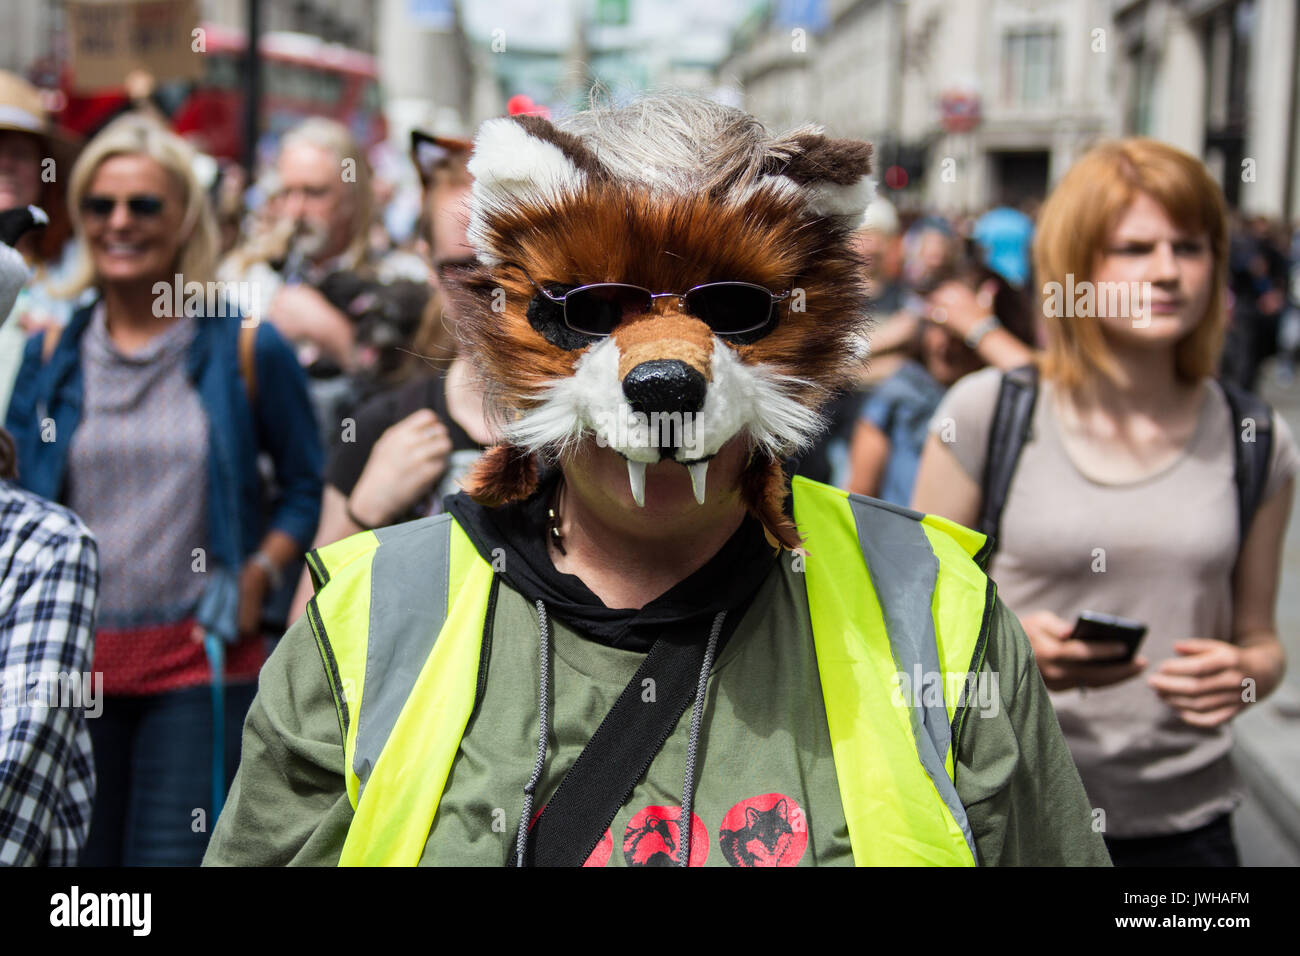 London, UK. 12th Aug, 2017. In a Protest organised by the Make Hunting History coalition, the Badger Trust and Care2 demonstrators marched through central London and rallied outside of Downing Street. Credit: David Rowe/Alamy Live News Stock Photo